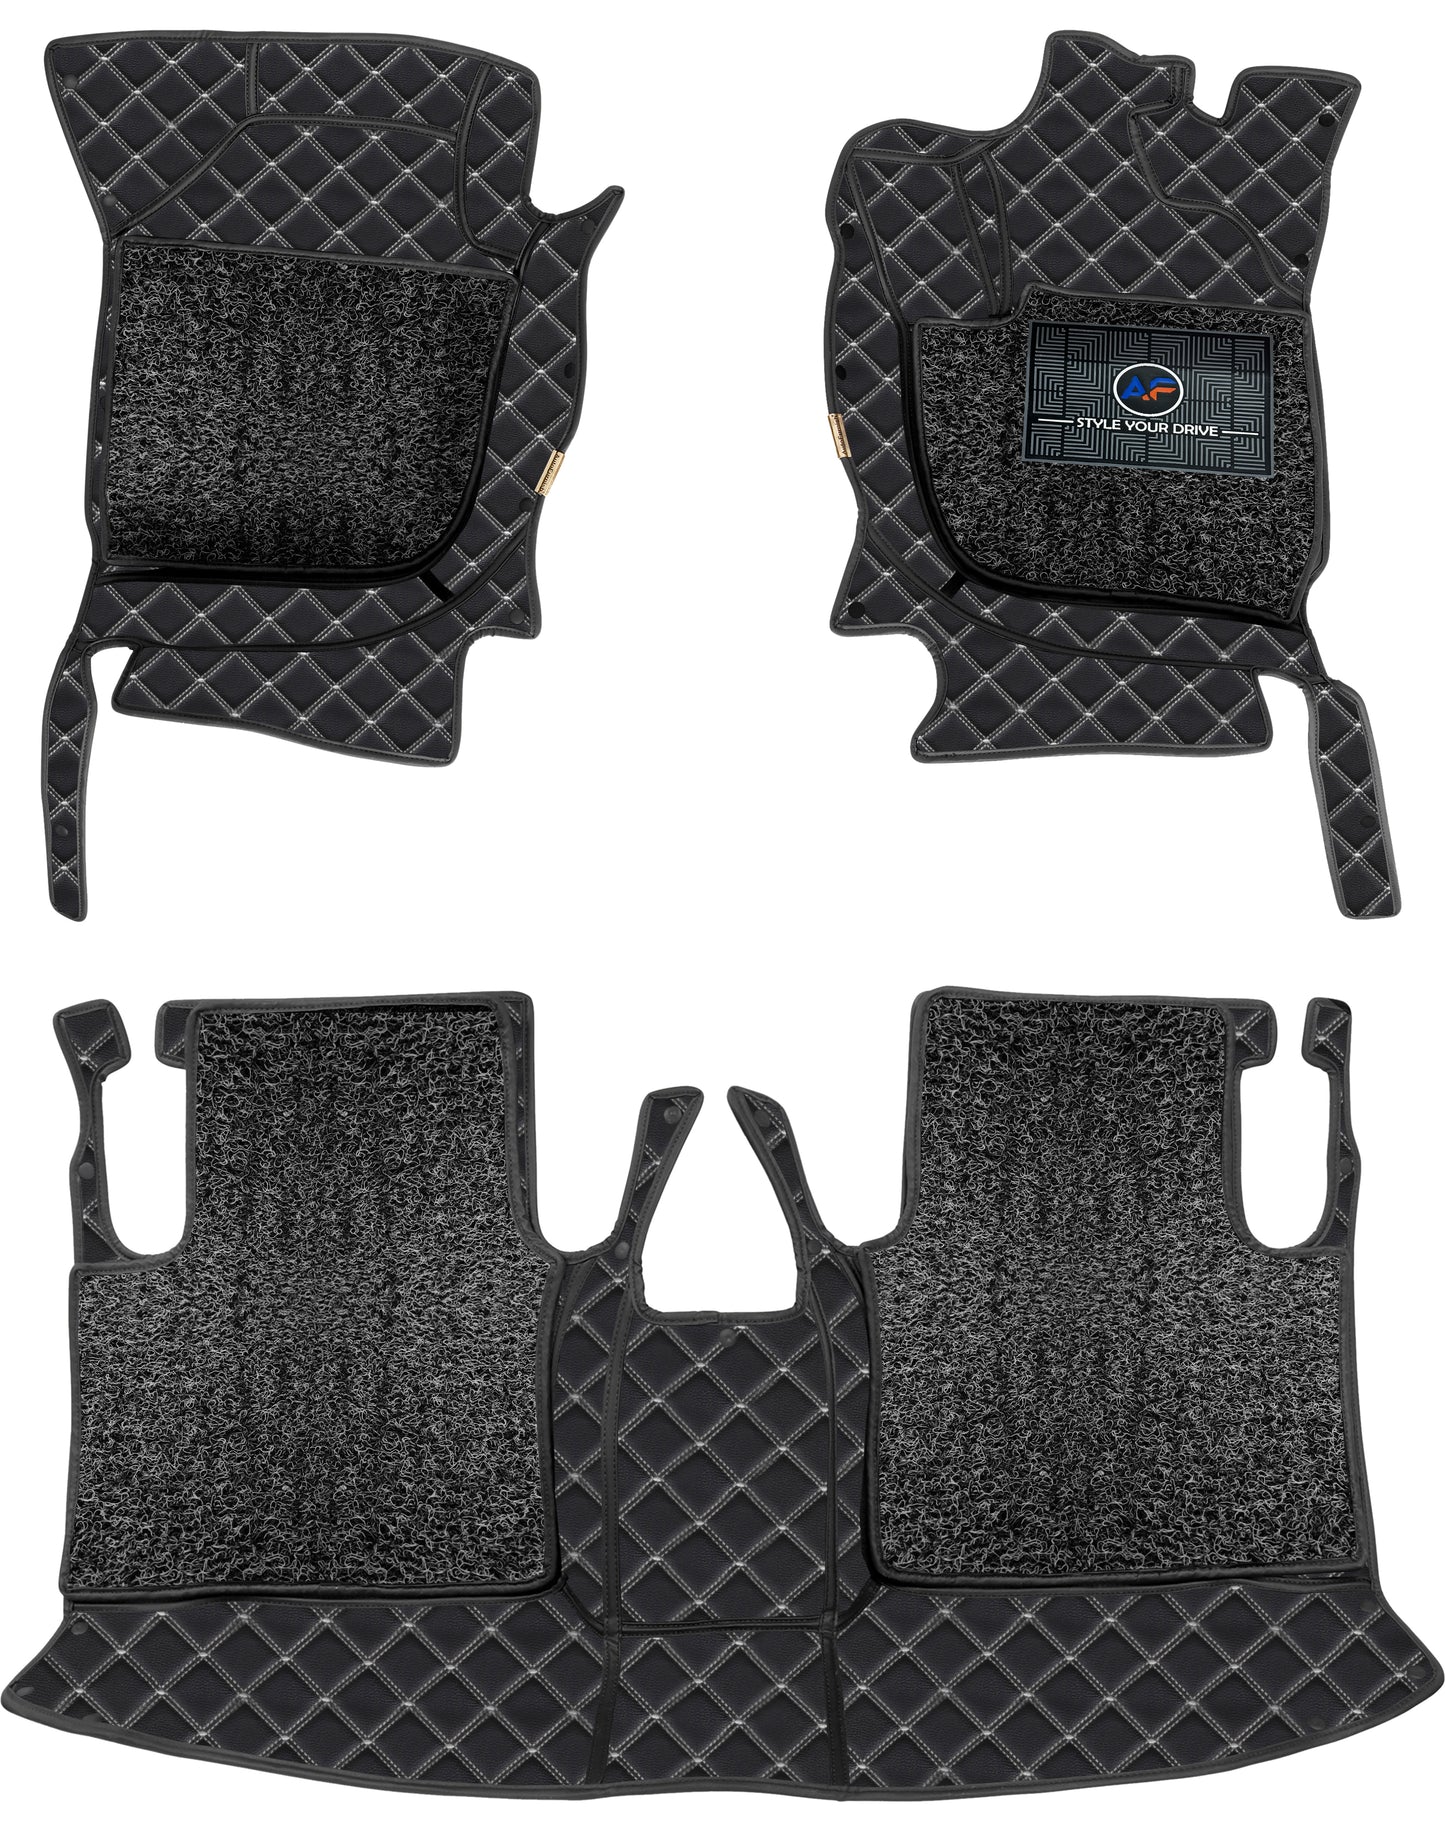 Audi Q7 2017 7D Luxury Car Mat, All Weather Proof, Anti-Skid, 100% Waterproof & Odorless with Unique Diamond Fish Design (24mm Luxury PU Leather, 2 Rows)